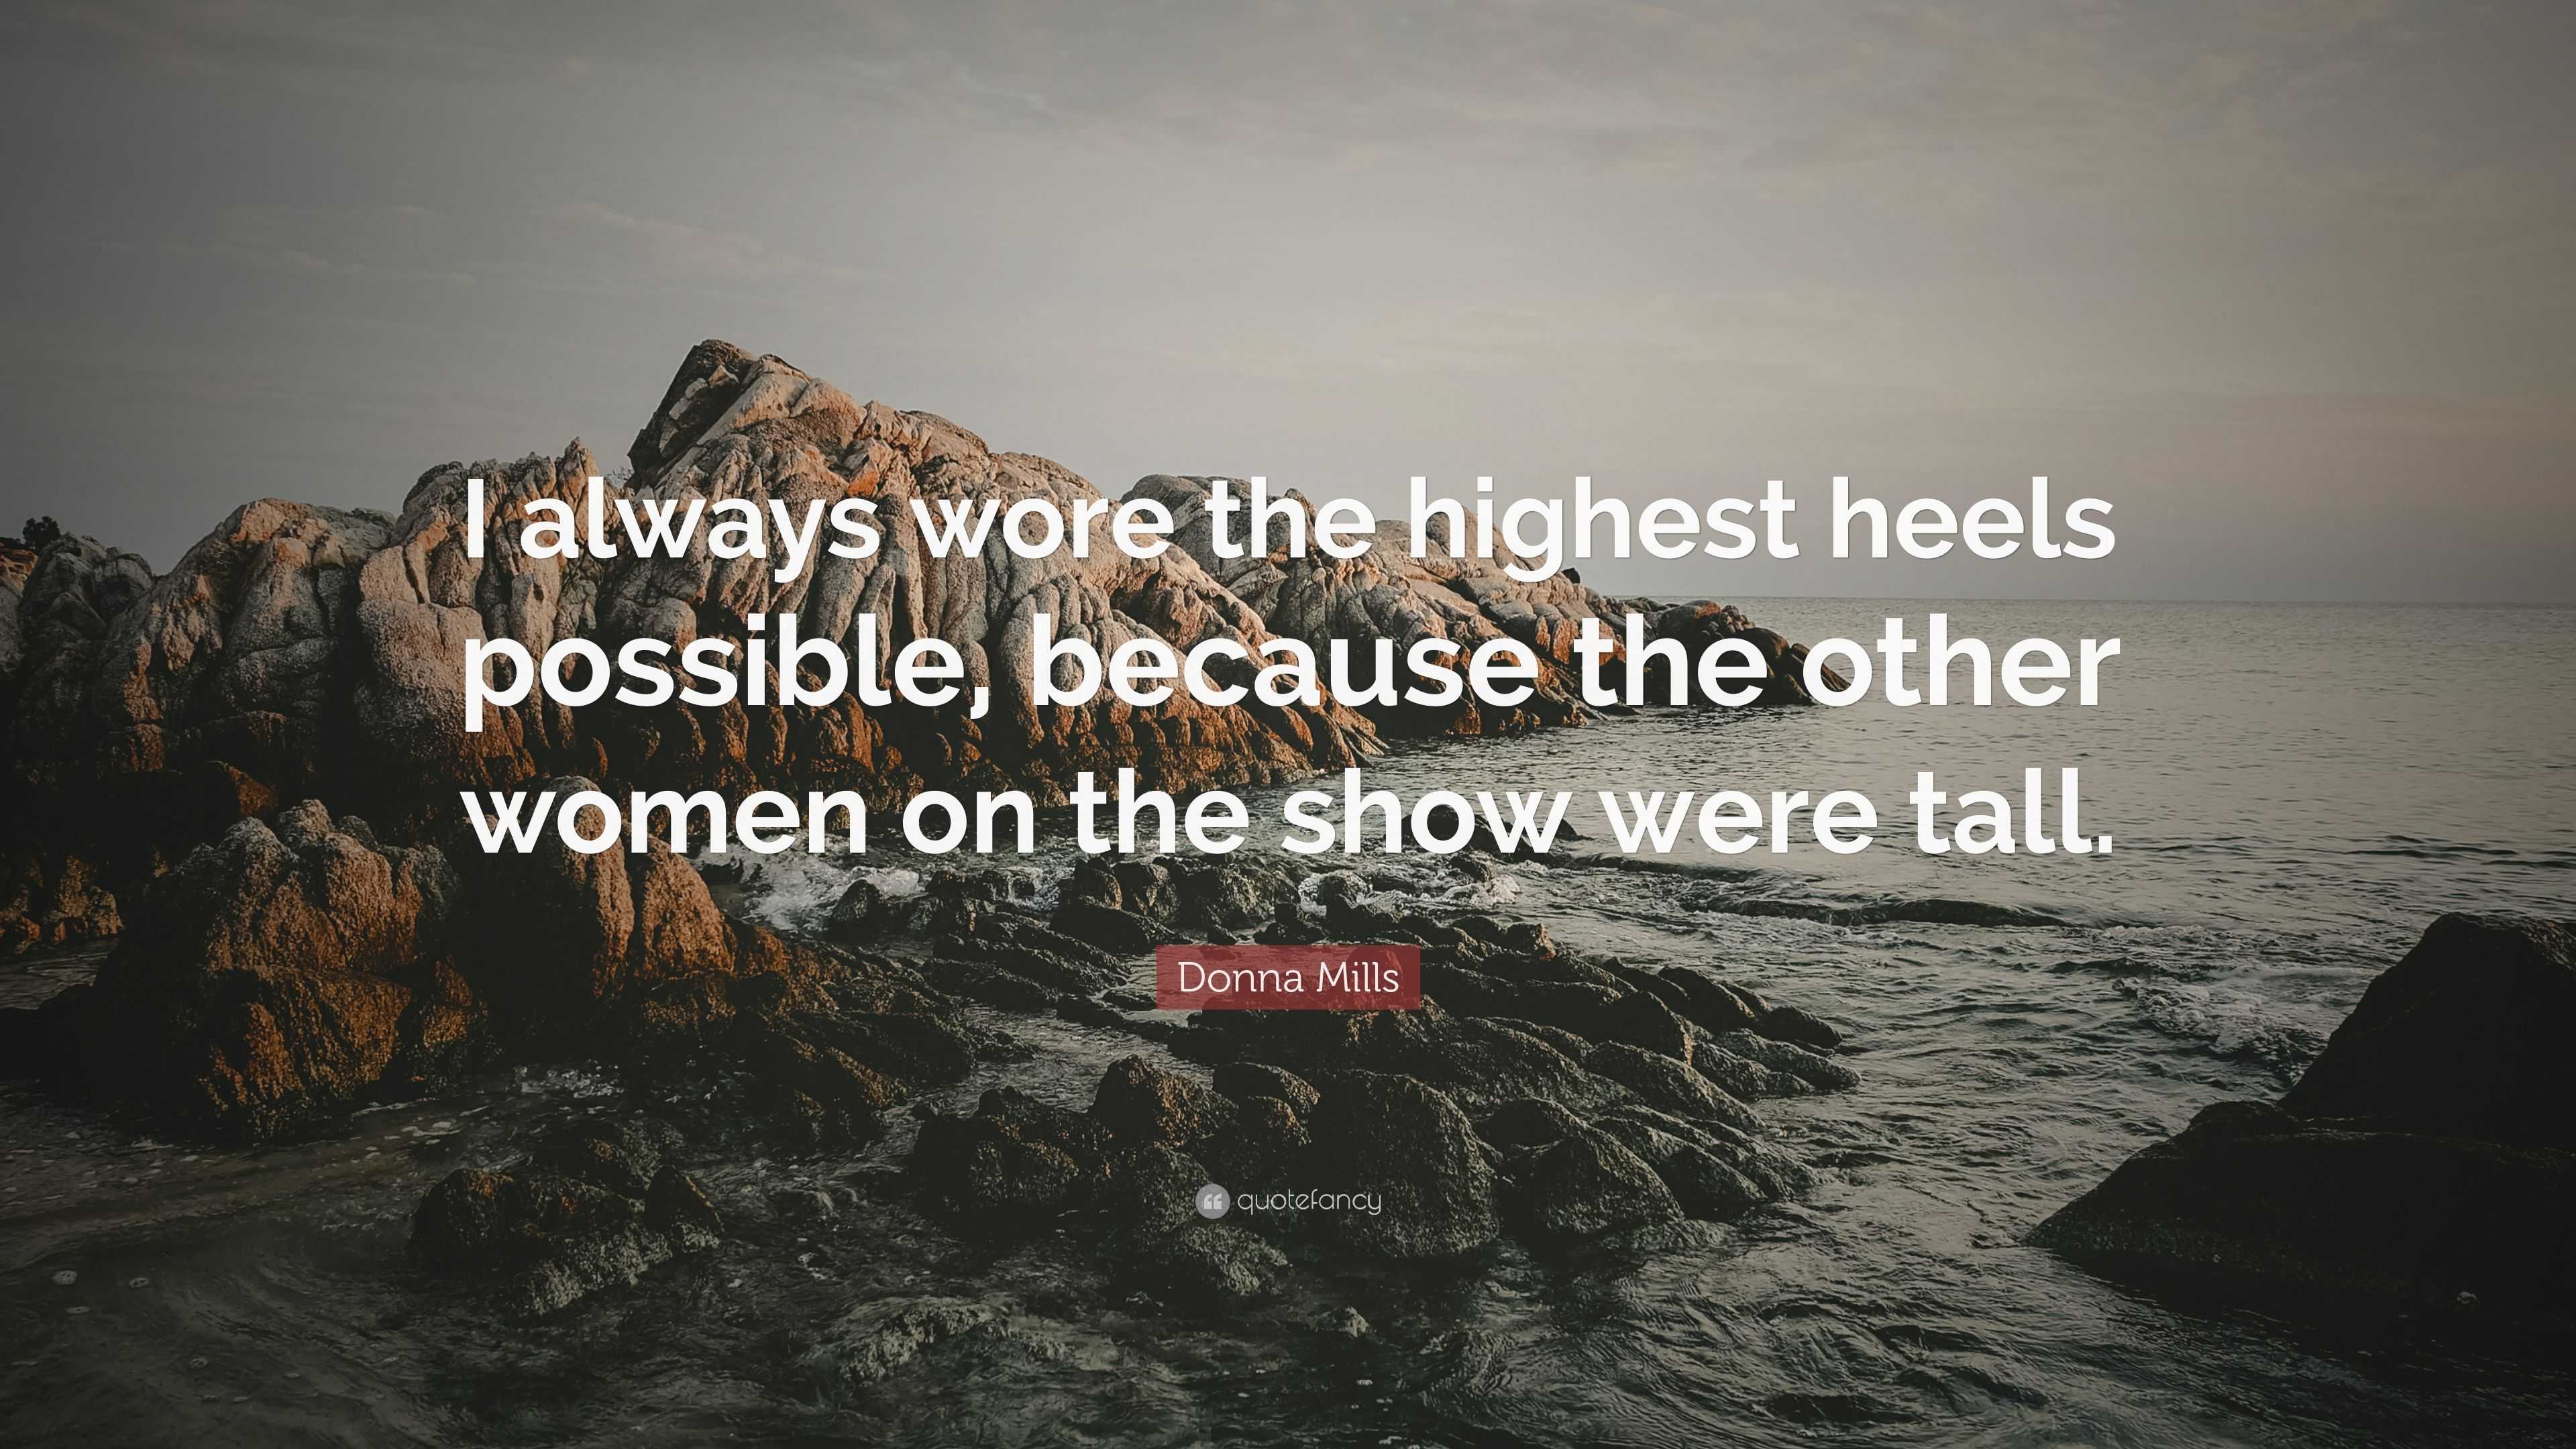 Donna Mills Quote: “I always wore the highest heels possible, because ...